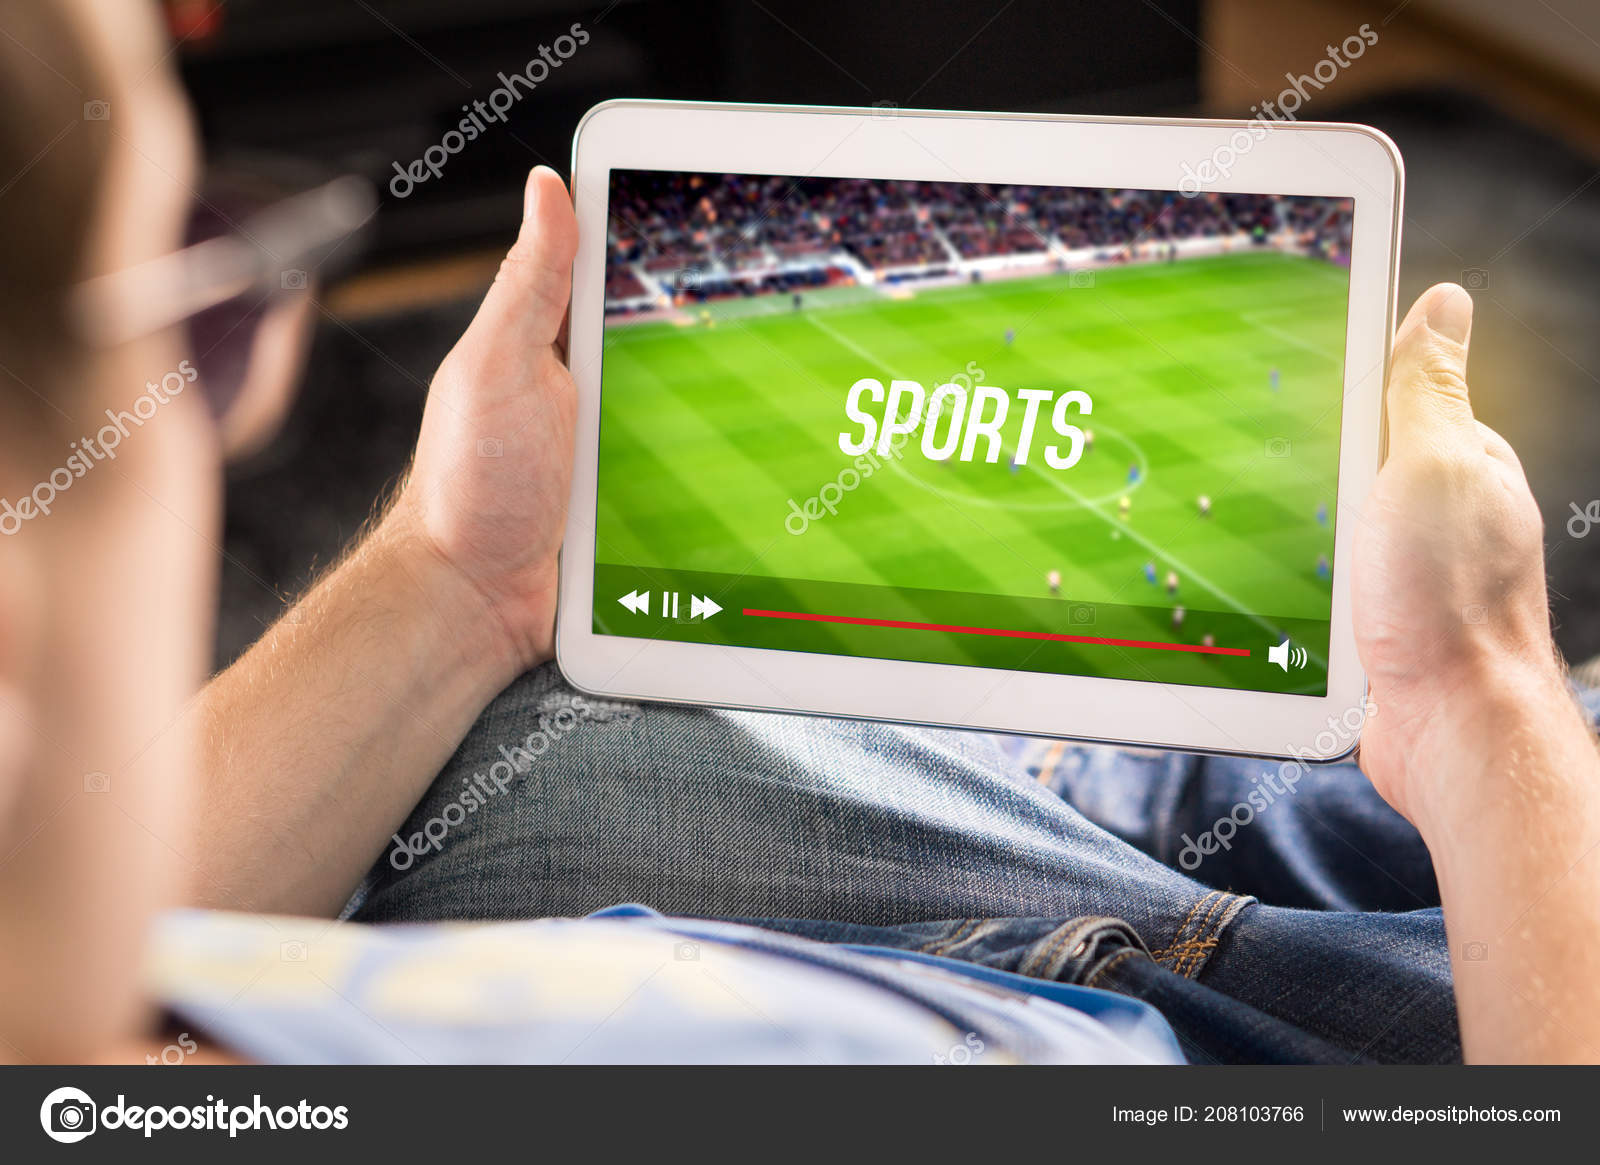 Sports online - Watch Highlights and Clips​